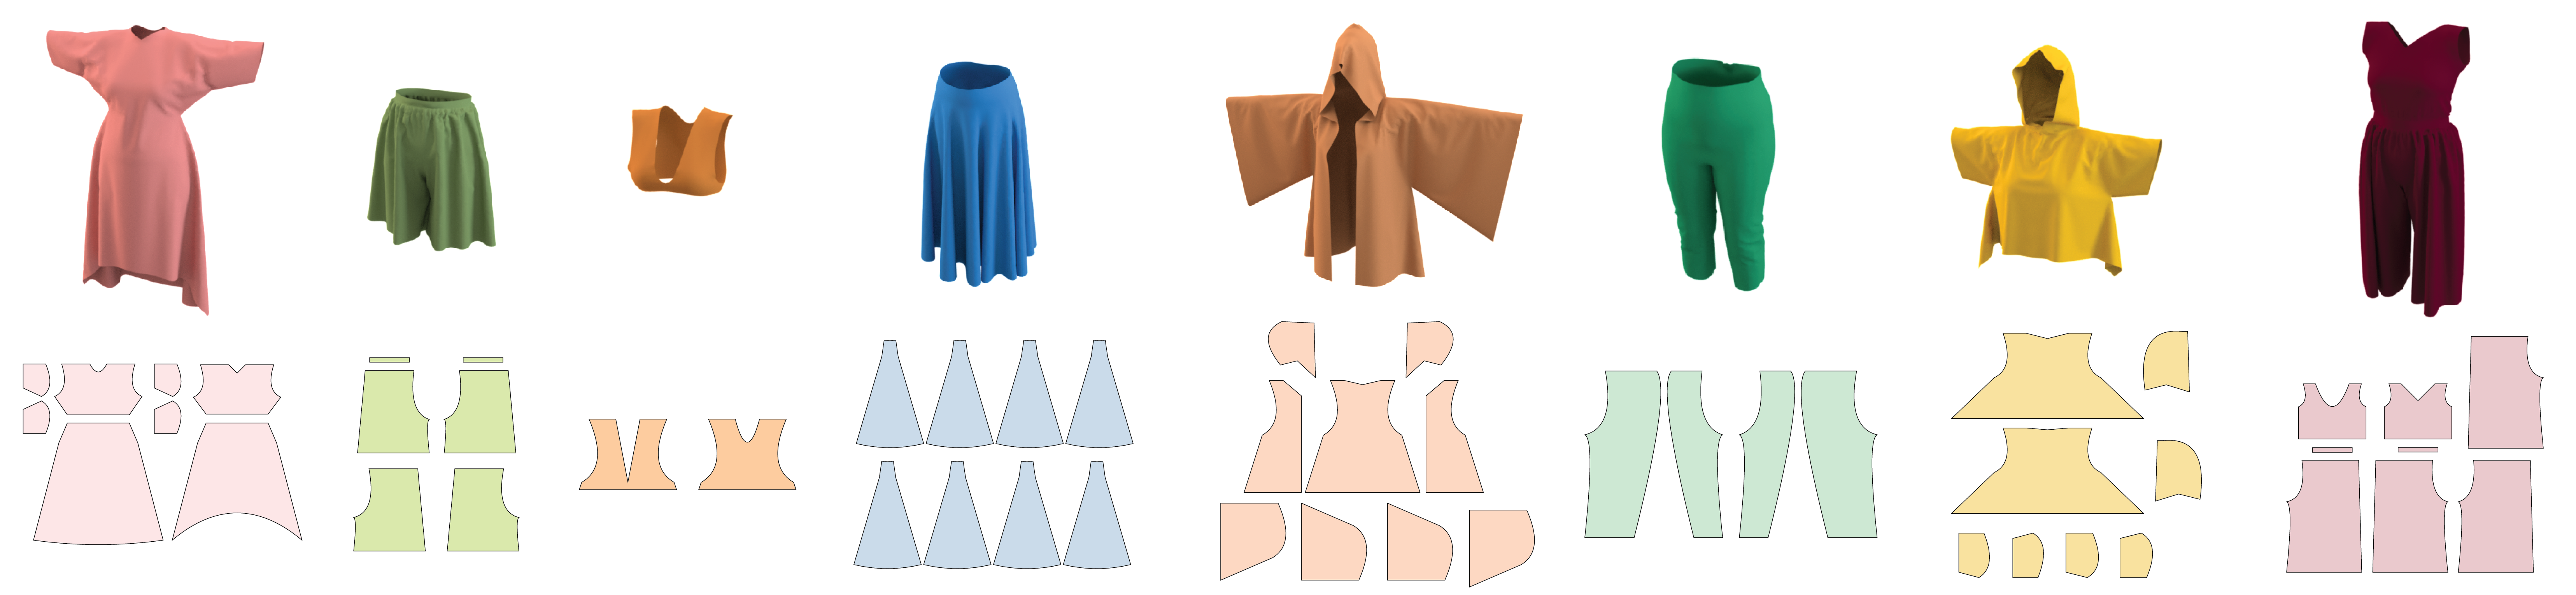 Examples of Garments generated with our pipeline